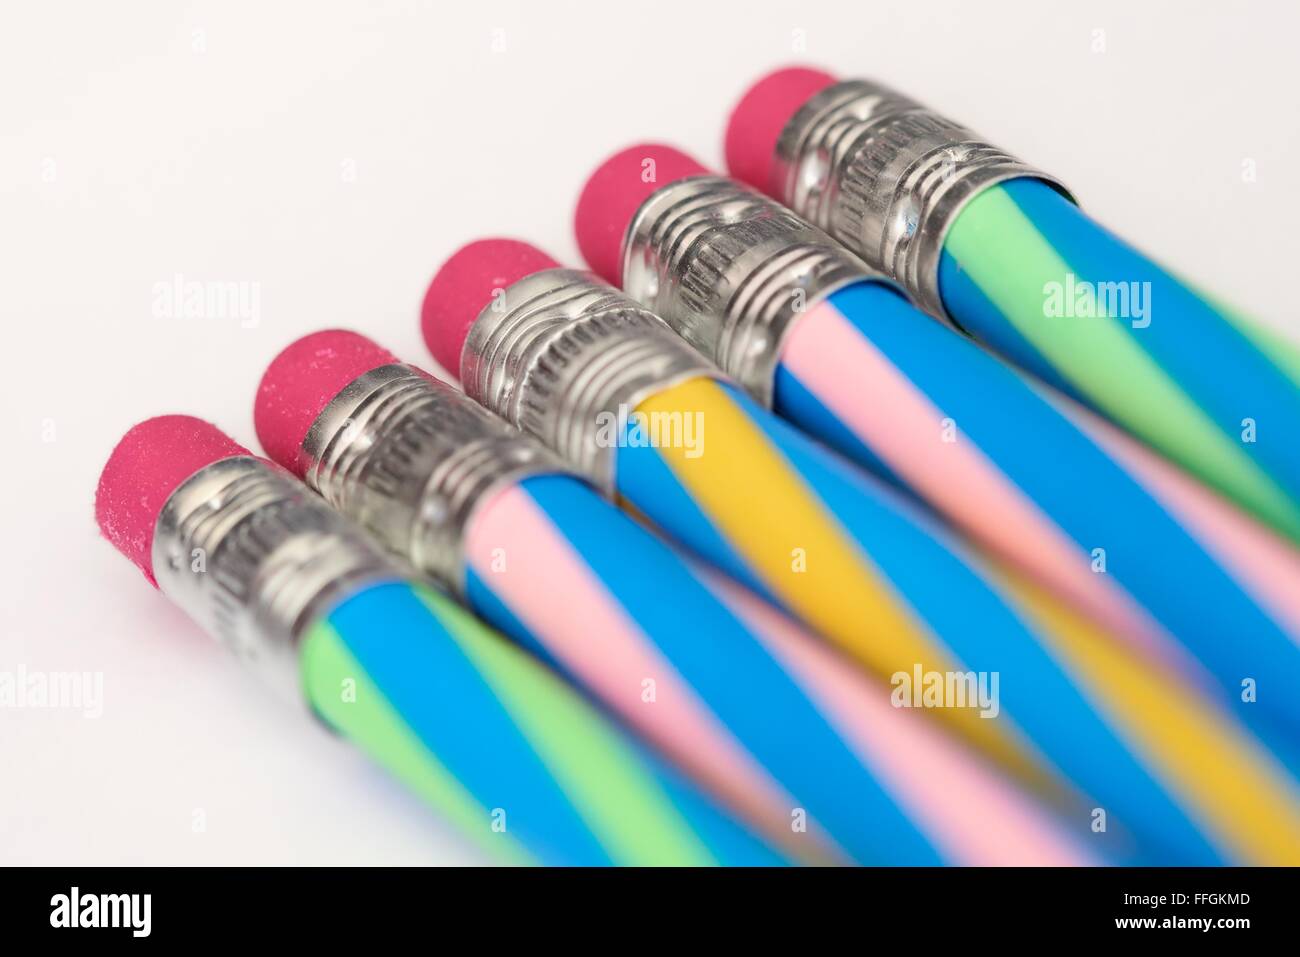 Rubber tipped eraser pencils Stock Photo